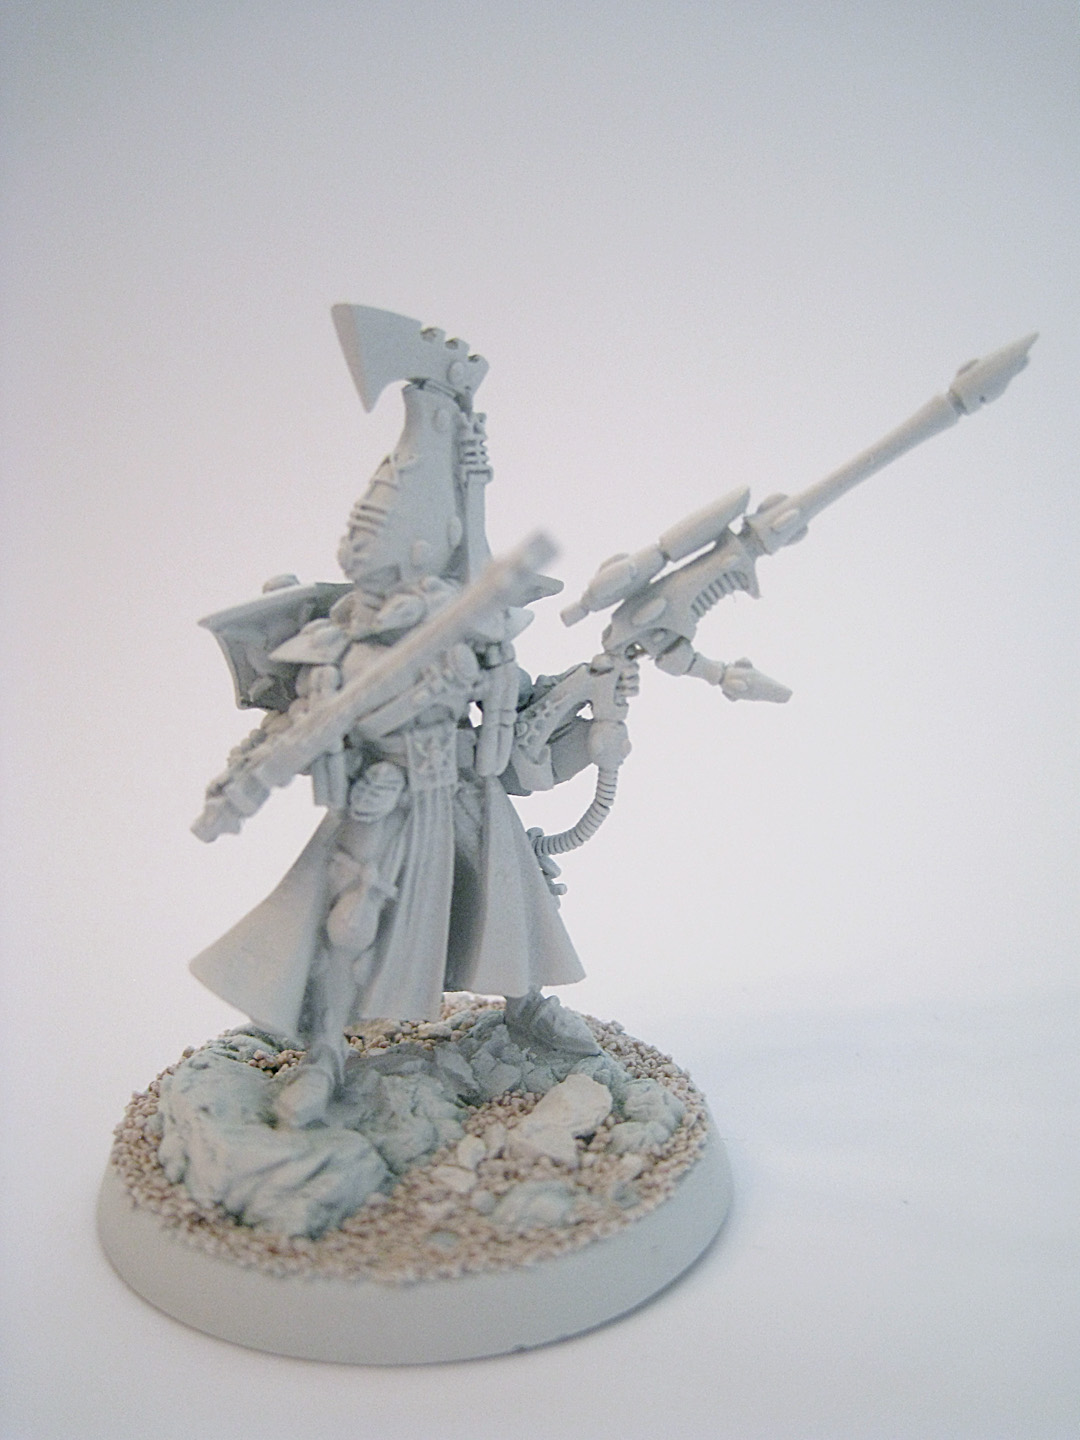 Converted Eldar Autarch with Uldanorethi Long rifle